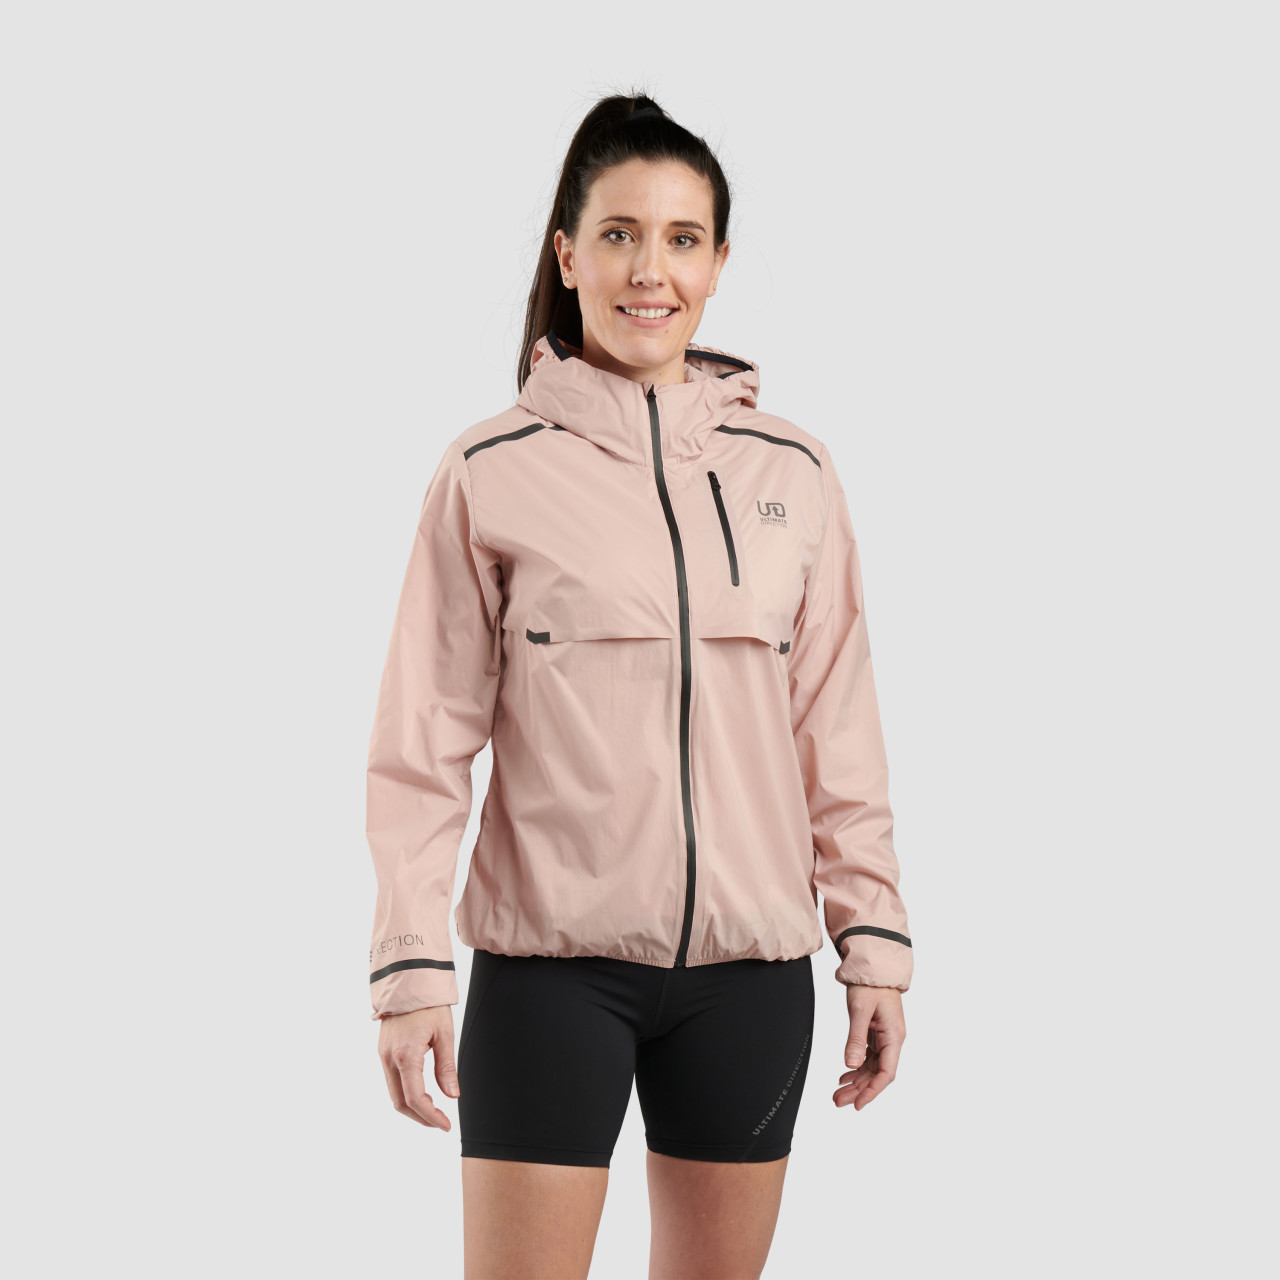 Ultimate Direction Women's Aerolight Wind Jacket in Clay Size Large